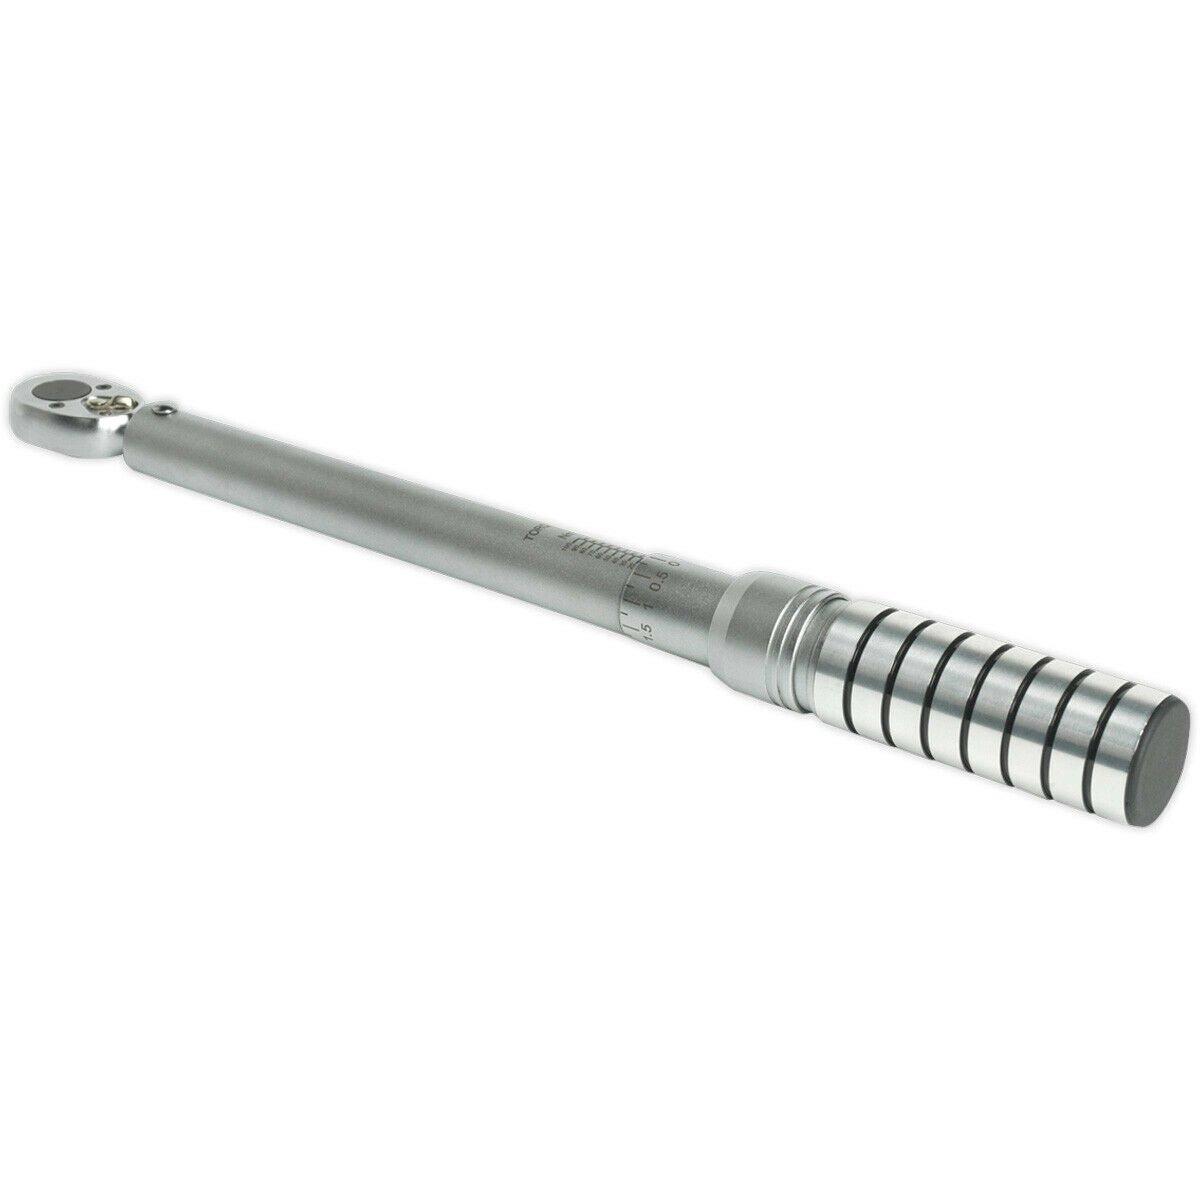 Micrometer Style Torque Wrench - 3/8